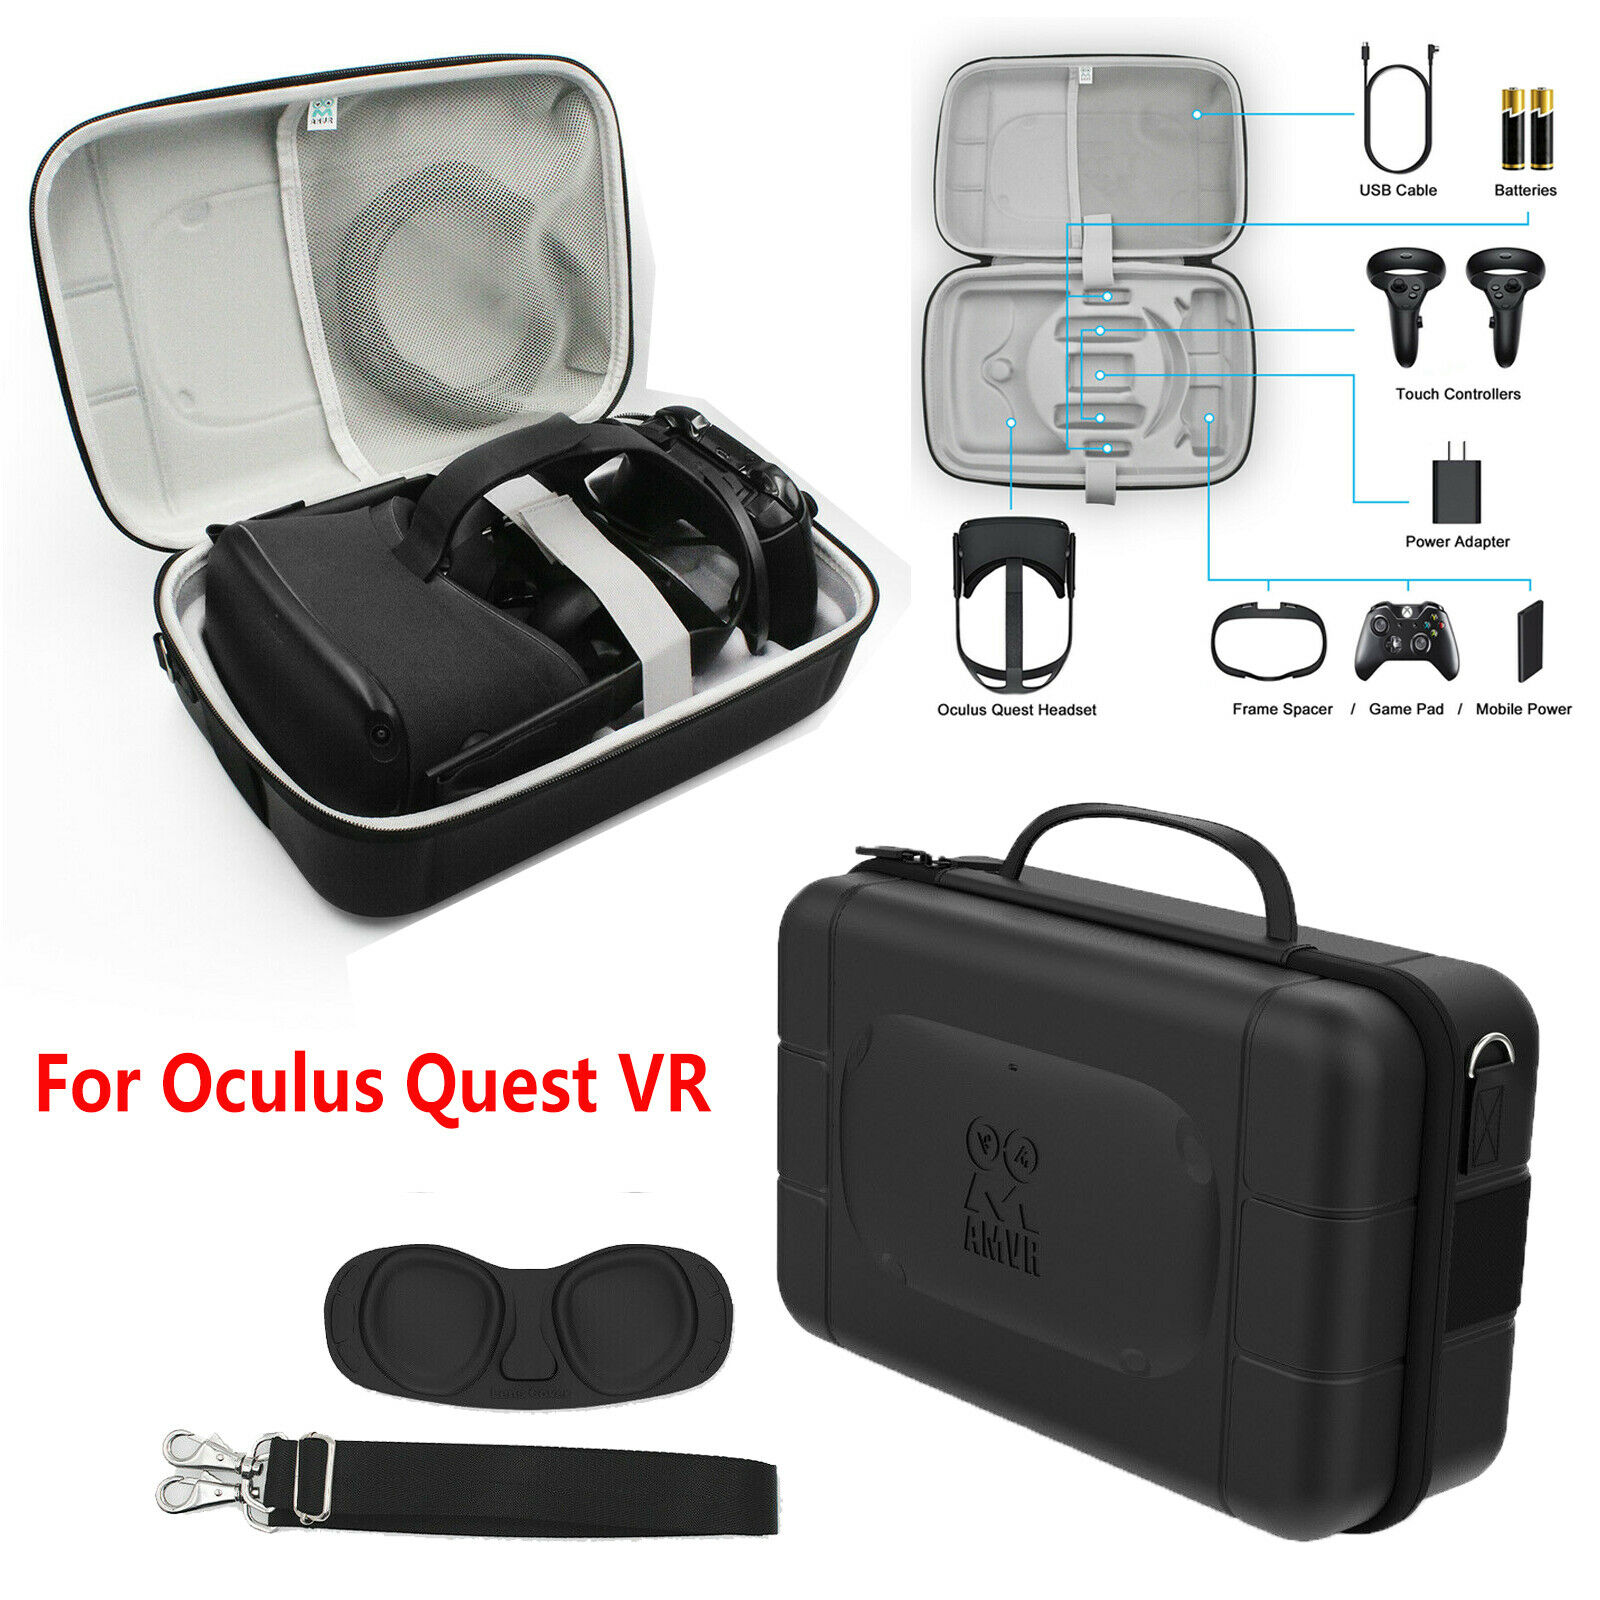 Carrying Case Storage Bag Protection For Oculus Quest Vr Headset & Controller